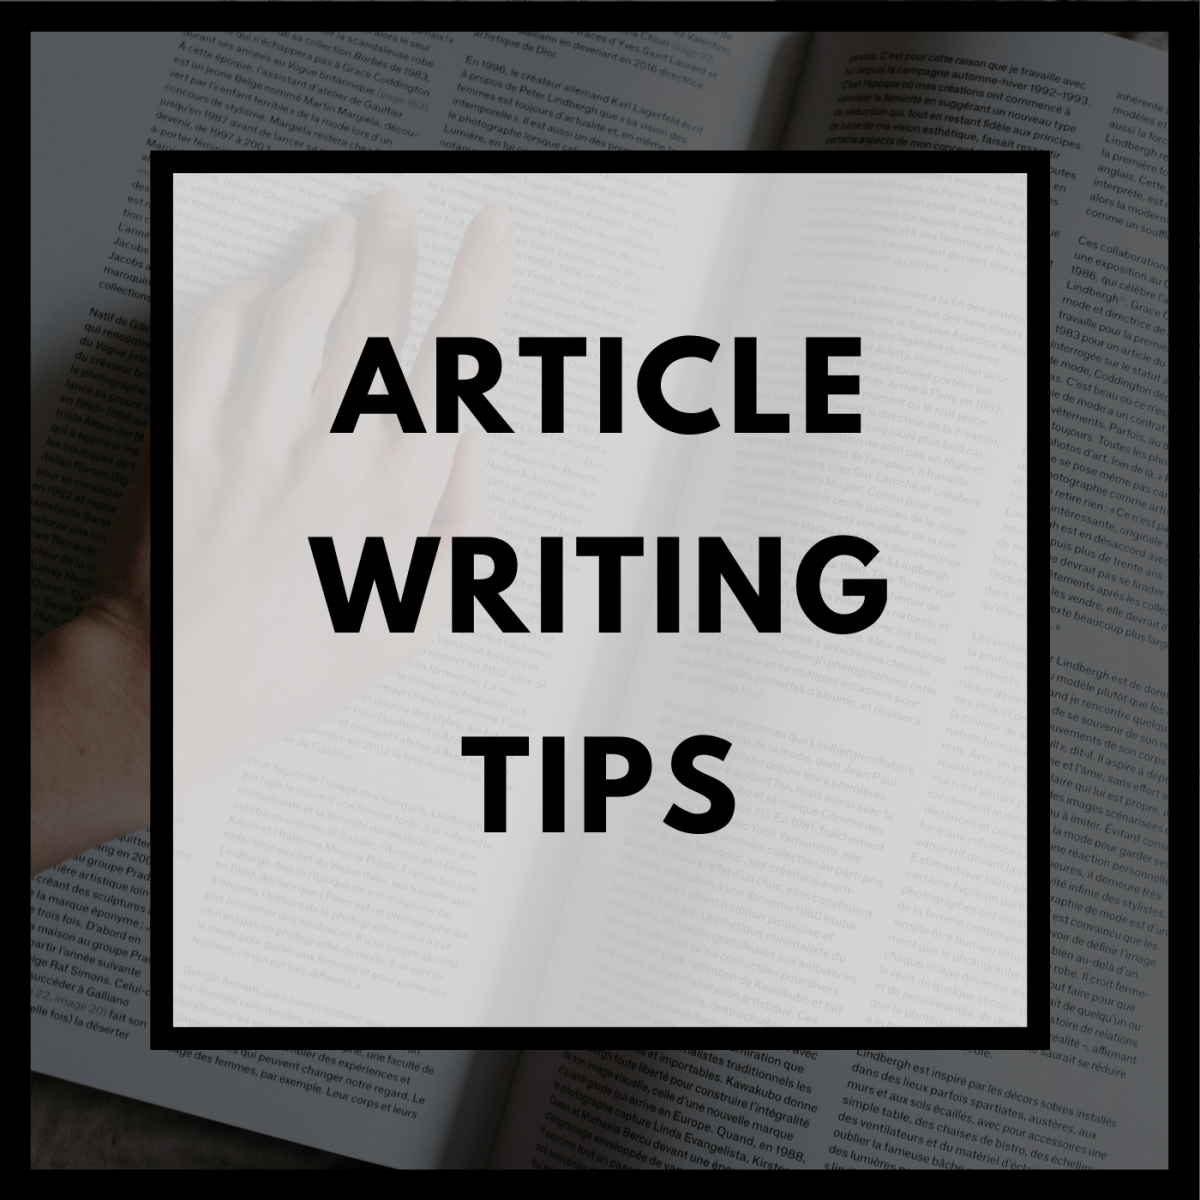 Here are some tips for writing great articles and columns 